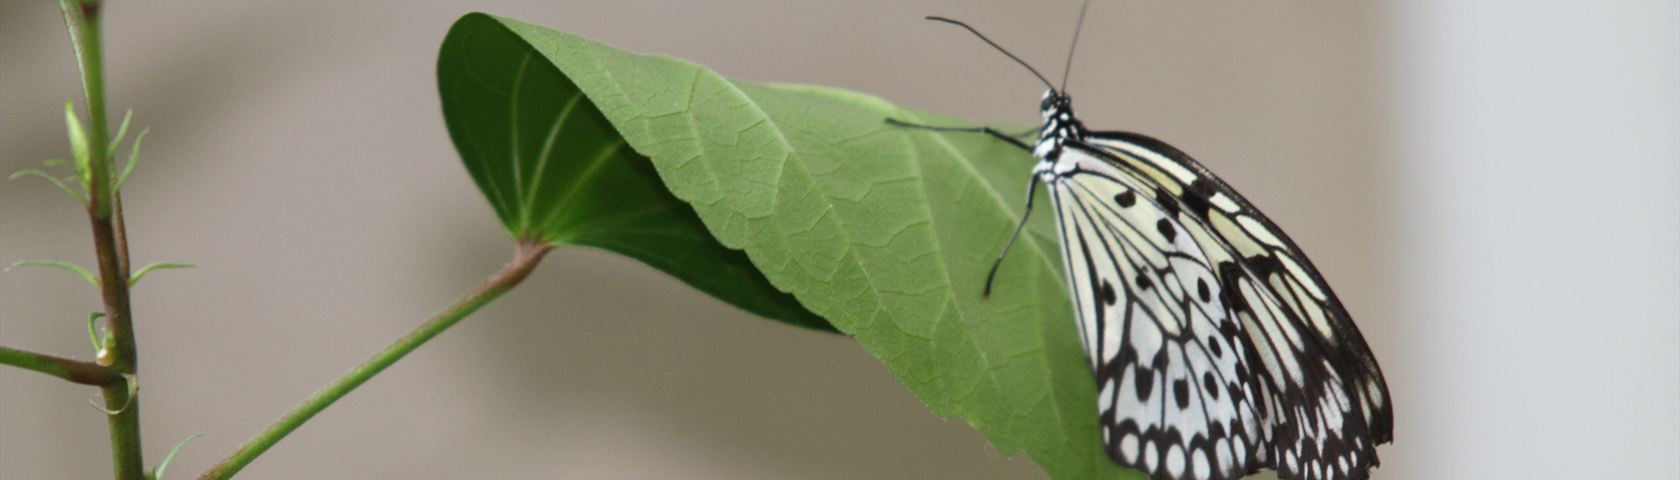 Gray and White Butterfly on Leaf